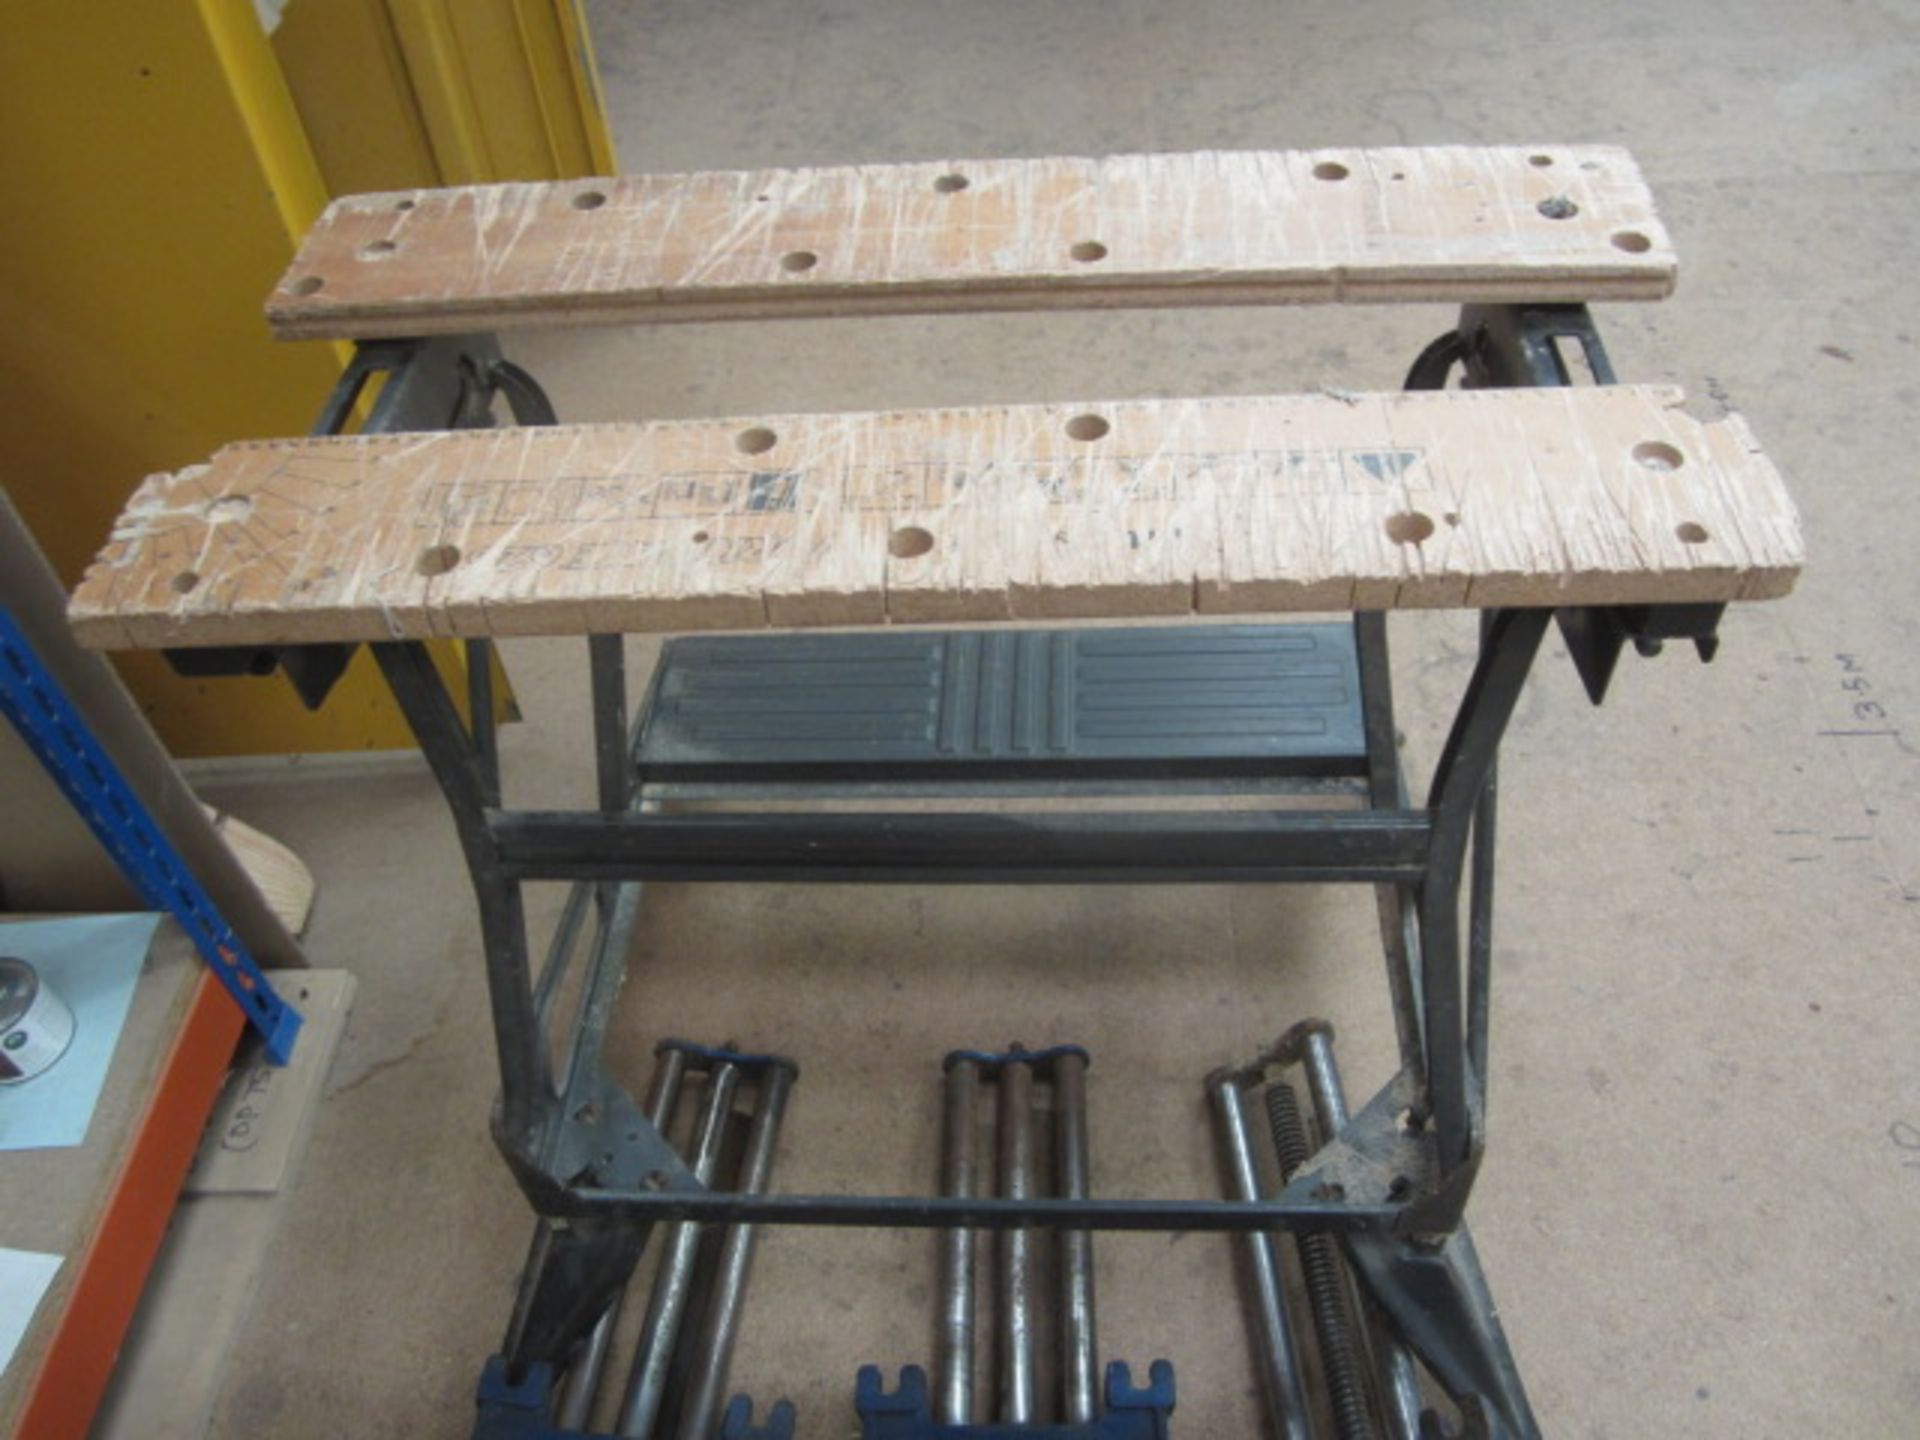 3 x carpenters bench vices, workmate - Image 2 of 3